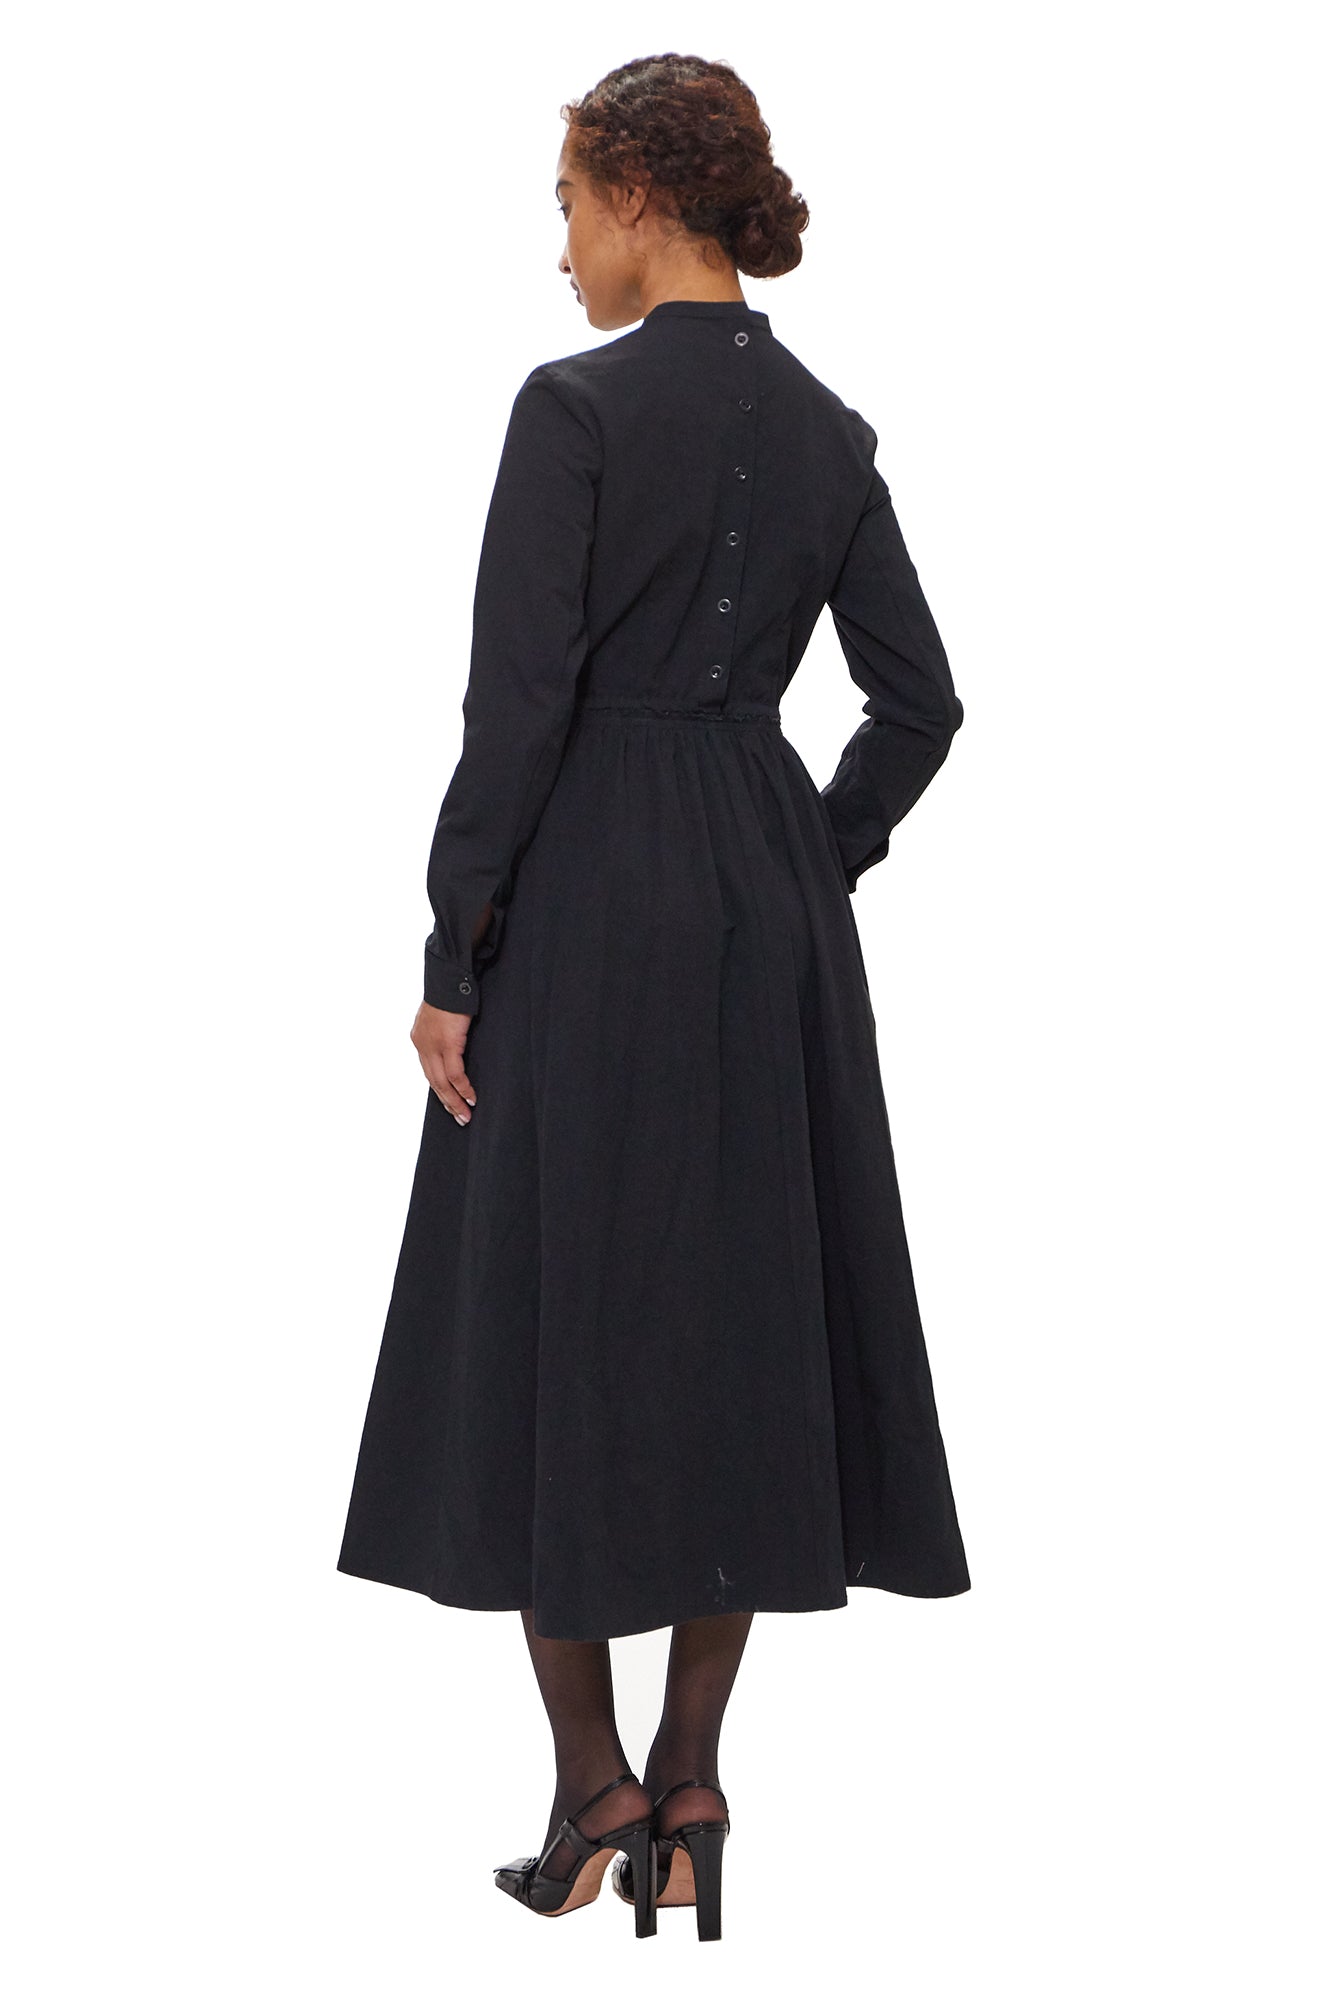 lillian worker dress with collapsible bodice into skirt